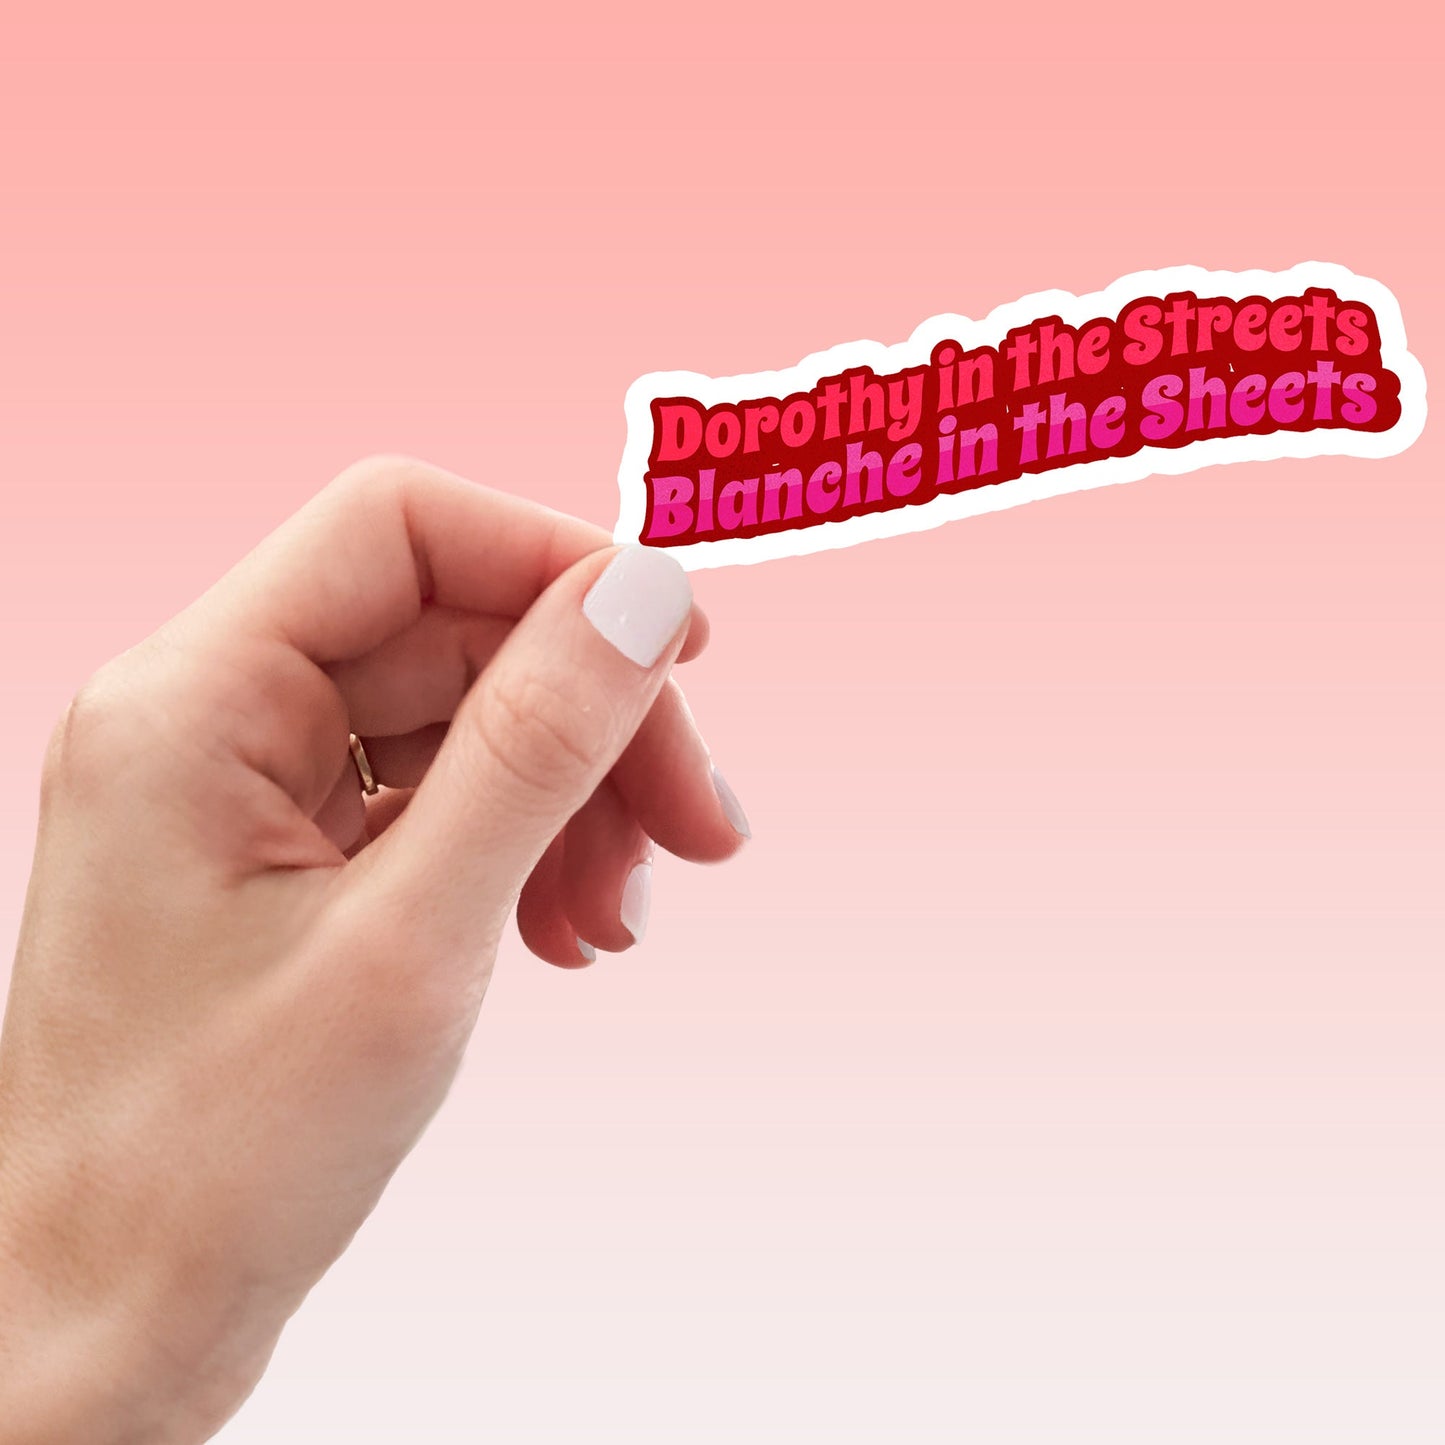 Load image into Gallery viewer, Dorothy in the Streets Blanche in the Sheets Golden Girls Funny Sticker-sticker-Crimson and Clover Studio
